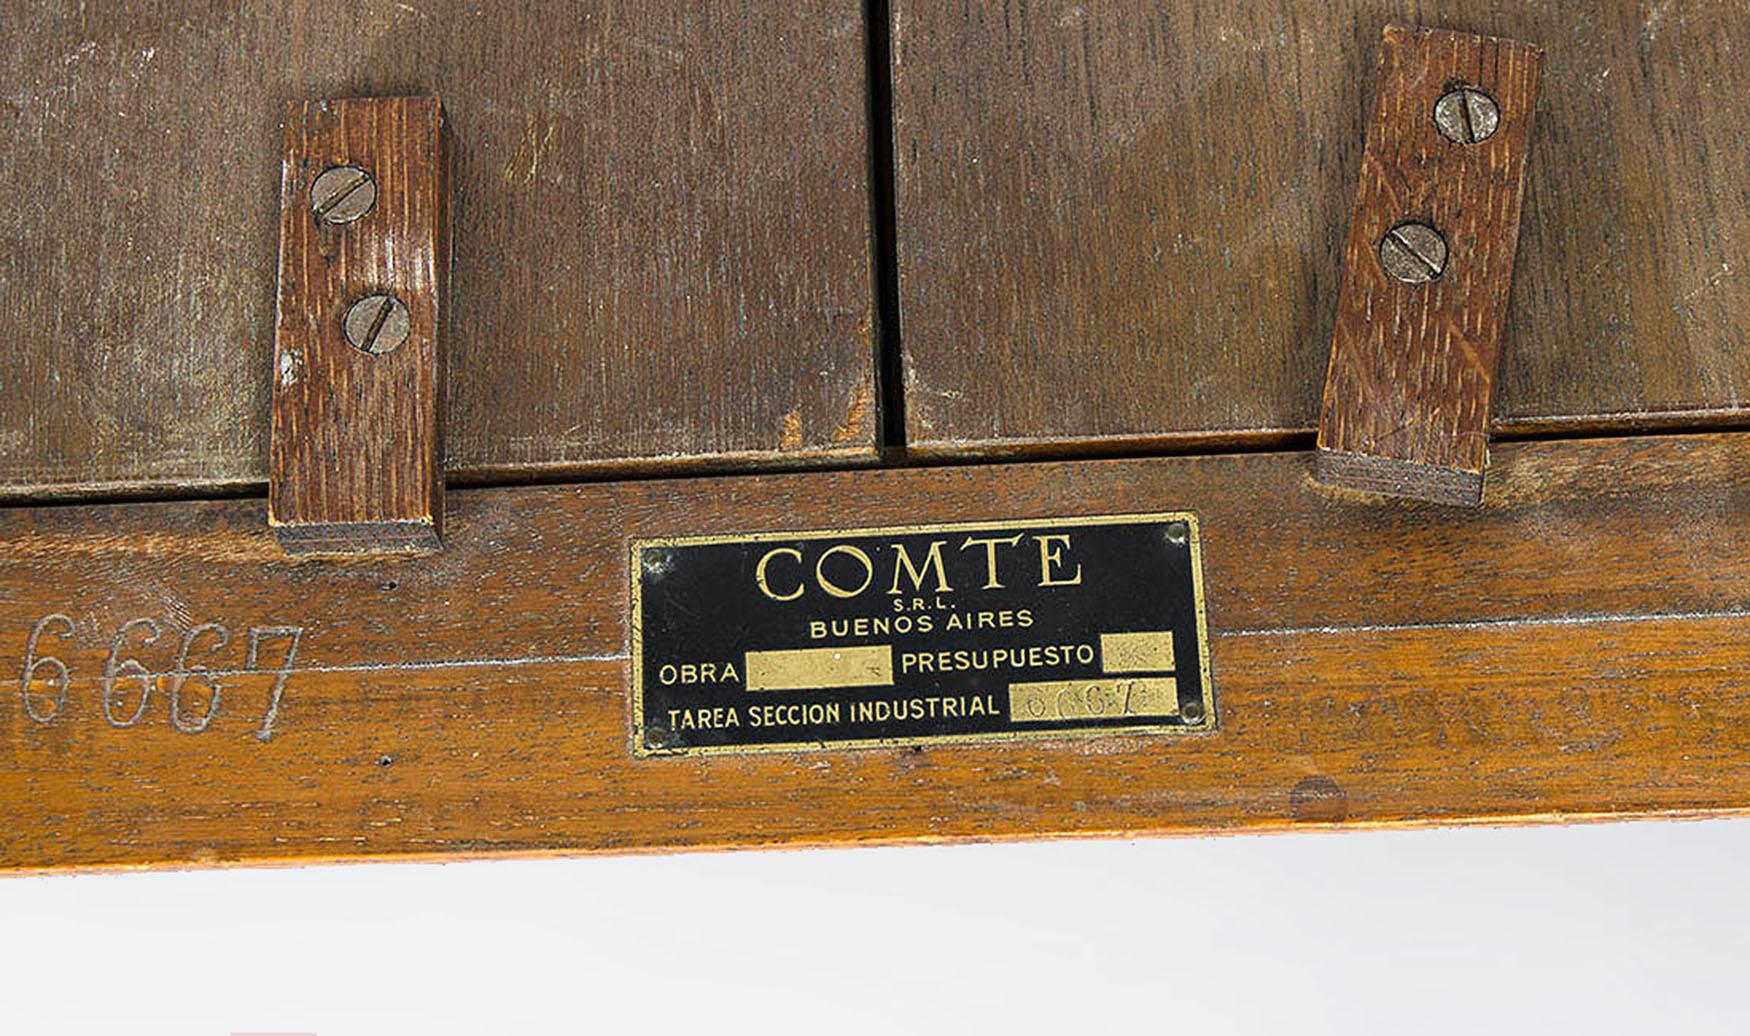 Mid-20th Century Argentine Wooden Desk/Game Table with Chessboard by Comte S.A. For Sale 1